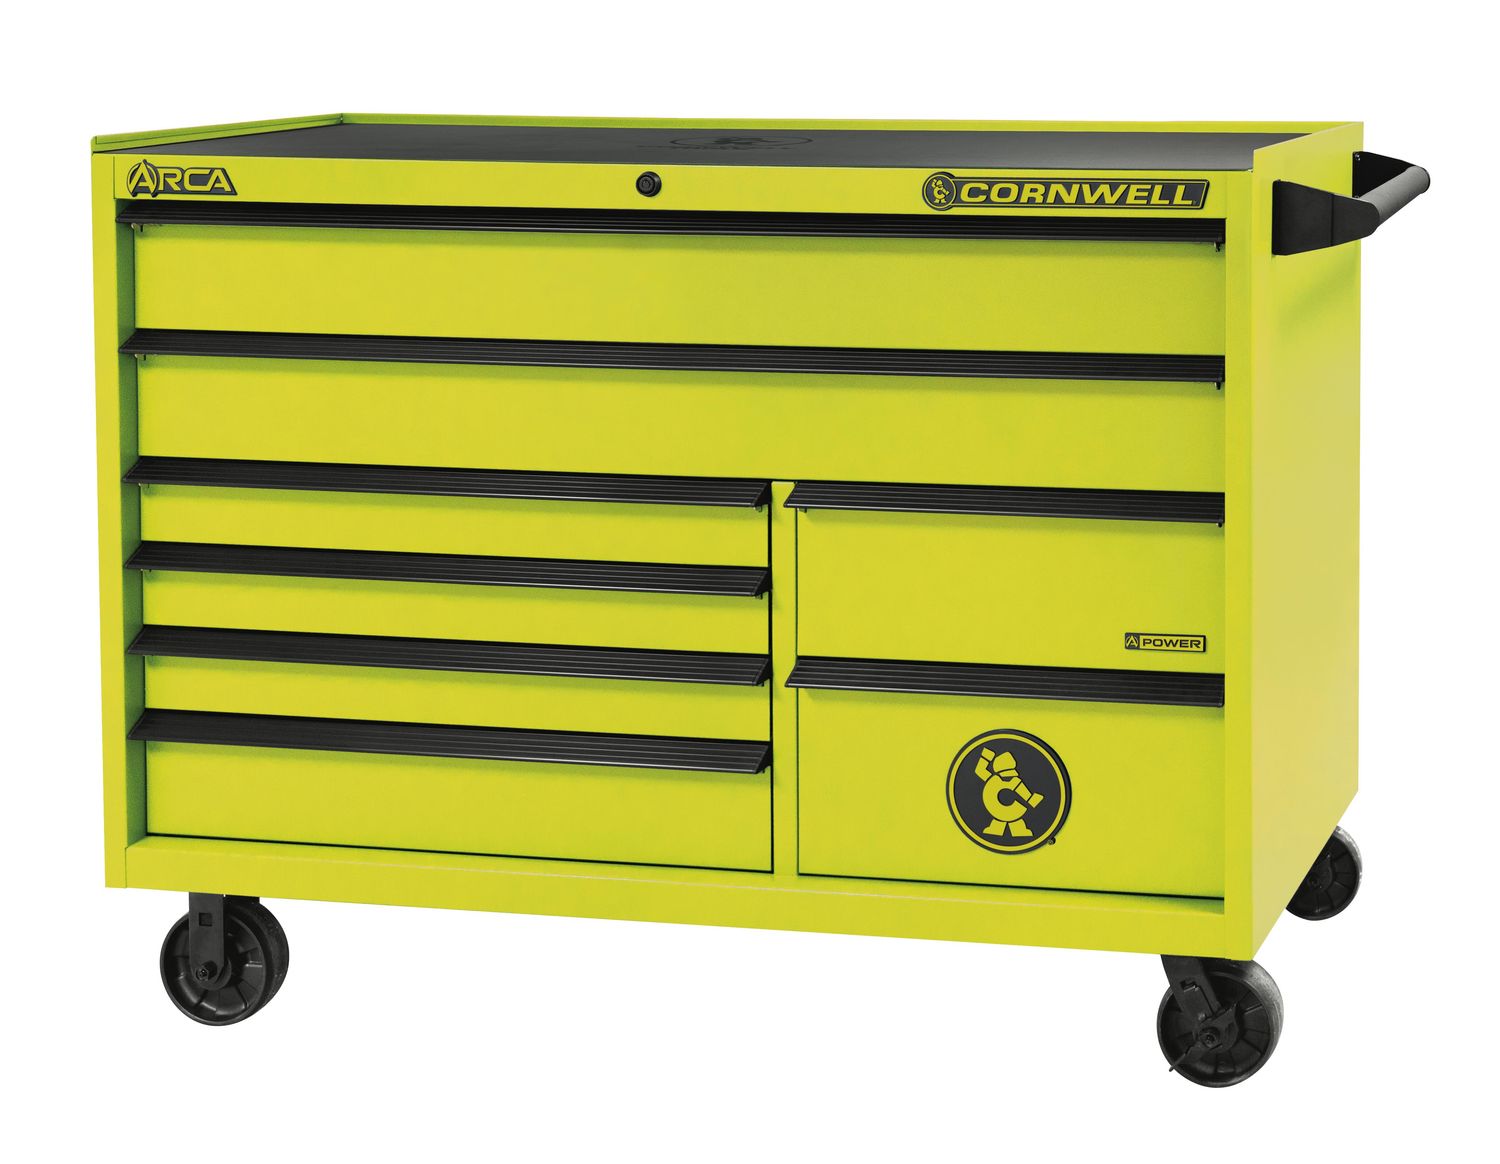 CTSASR578KLY - ARCA® 57” 8-Drawer Double Bank Roller Cabinet, Lightning Yellow